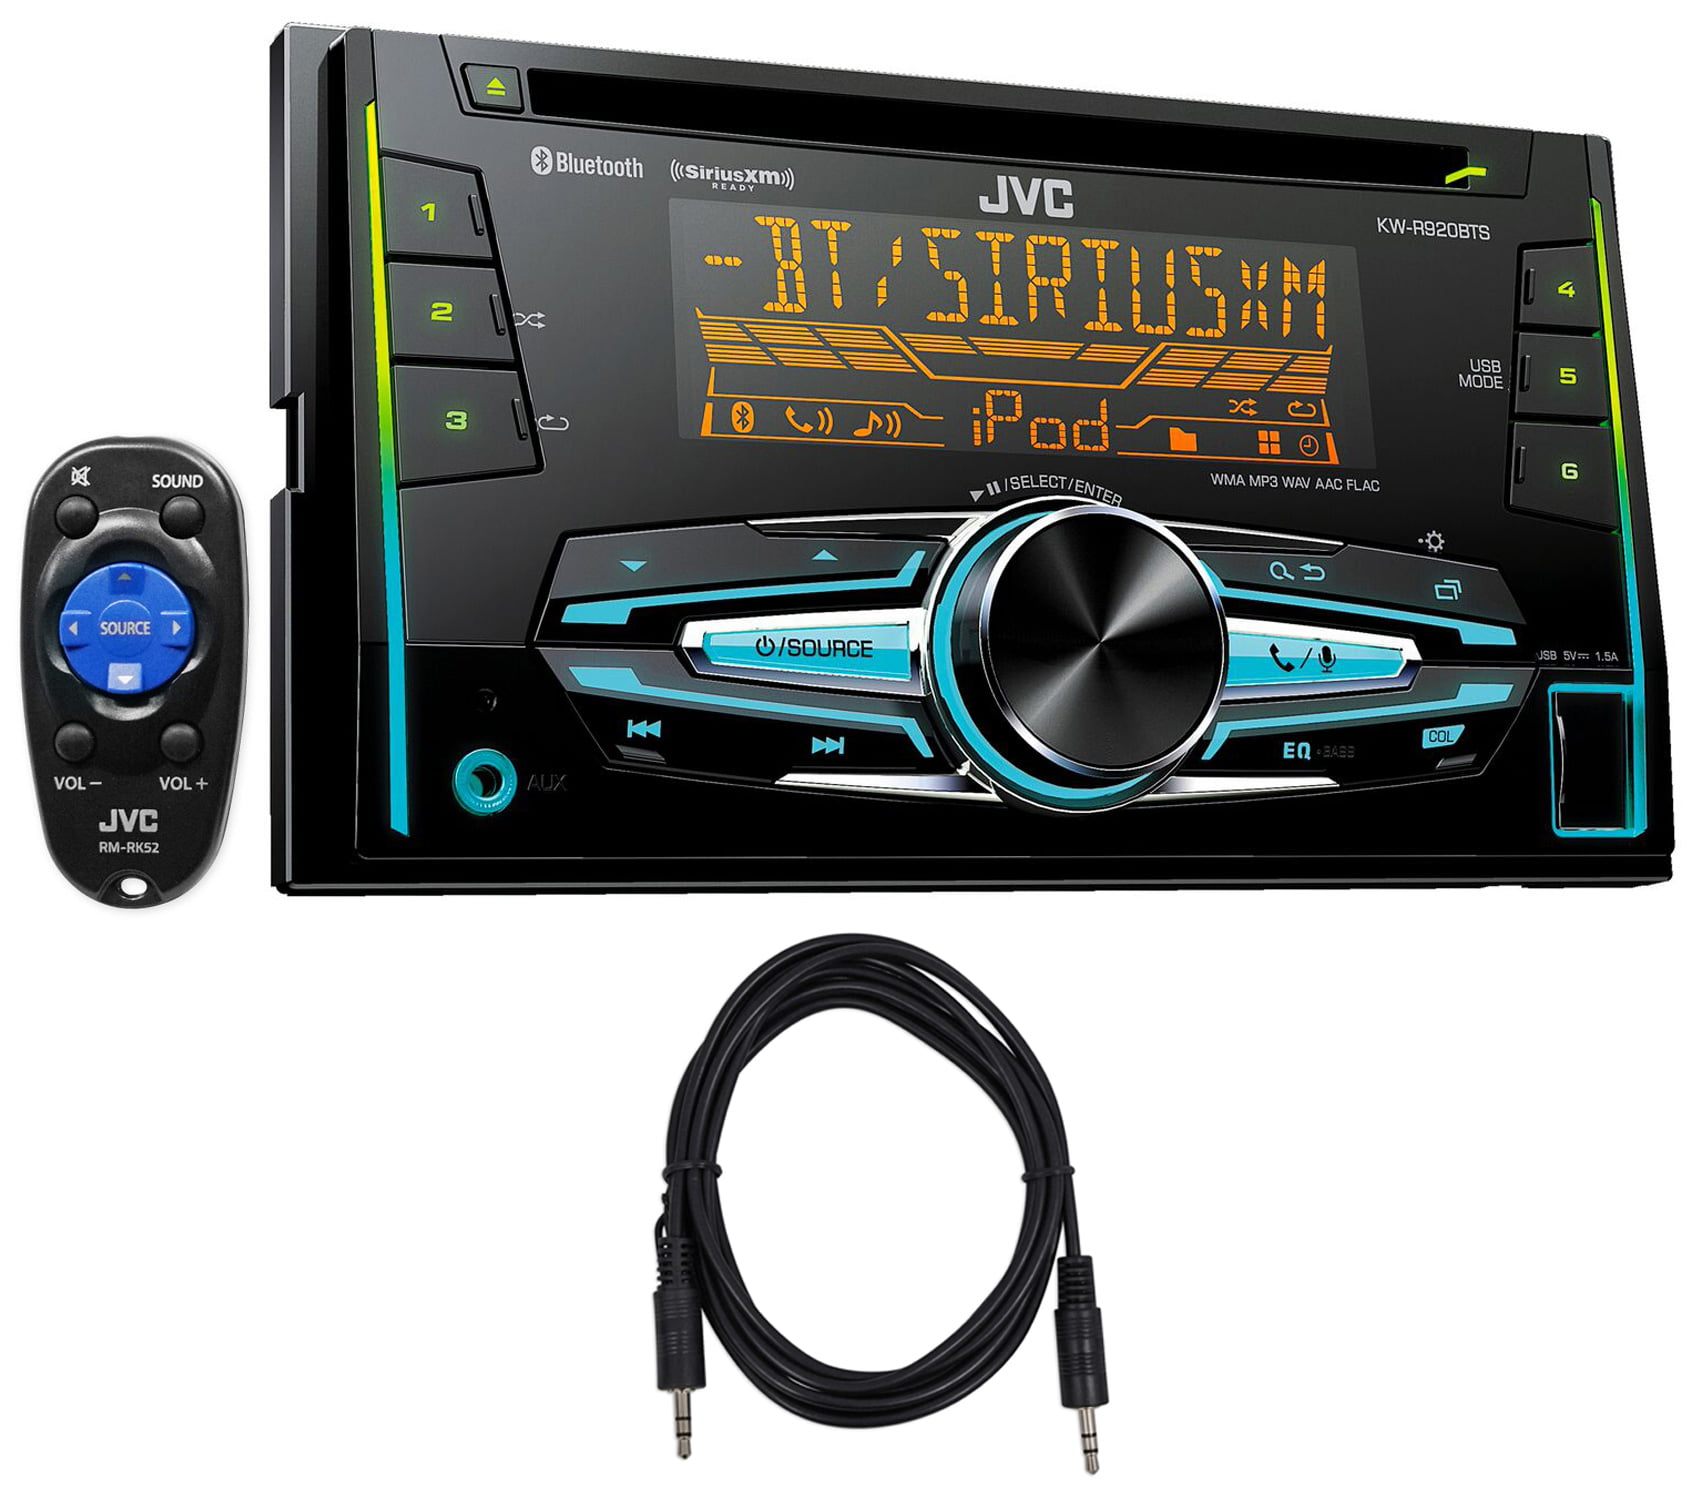 VW POLO 2009>14 Bluetooth car radio complete upgrade package USB AUX KW-R920BT 